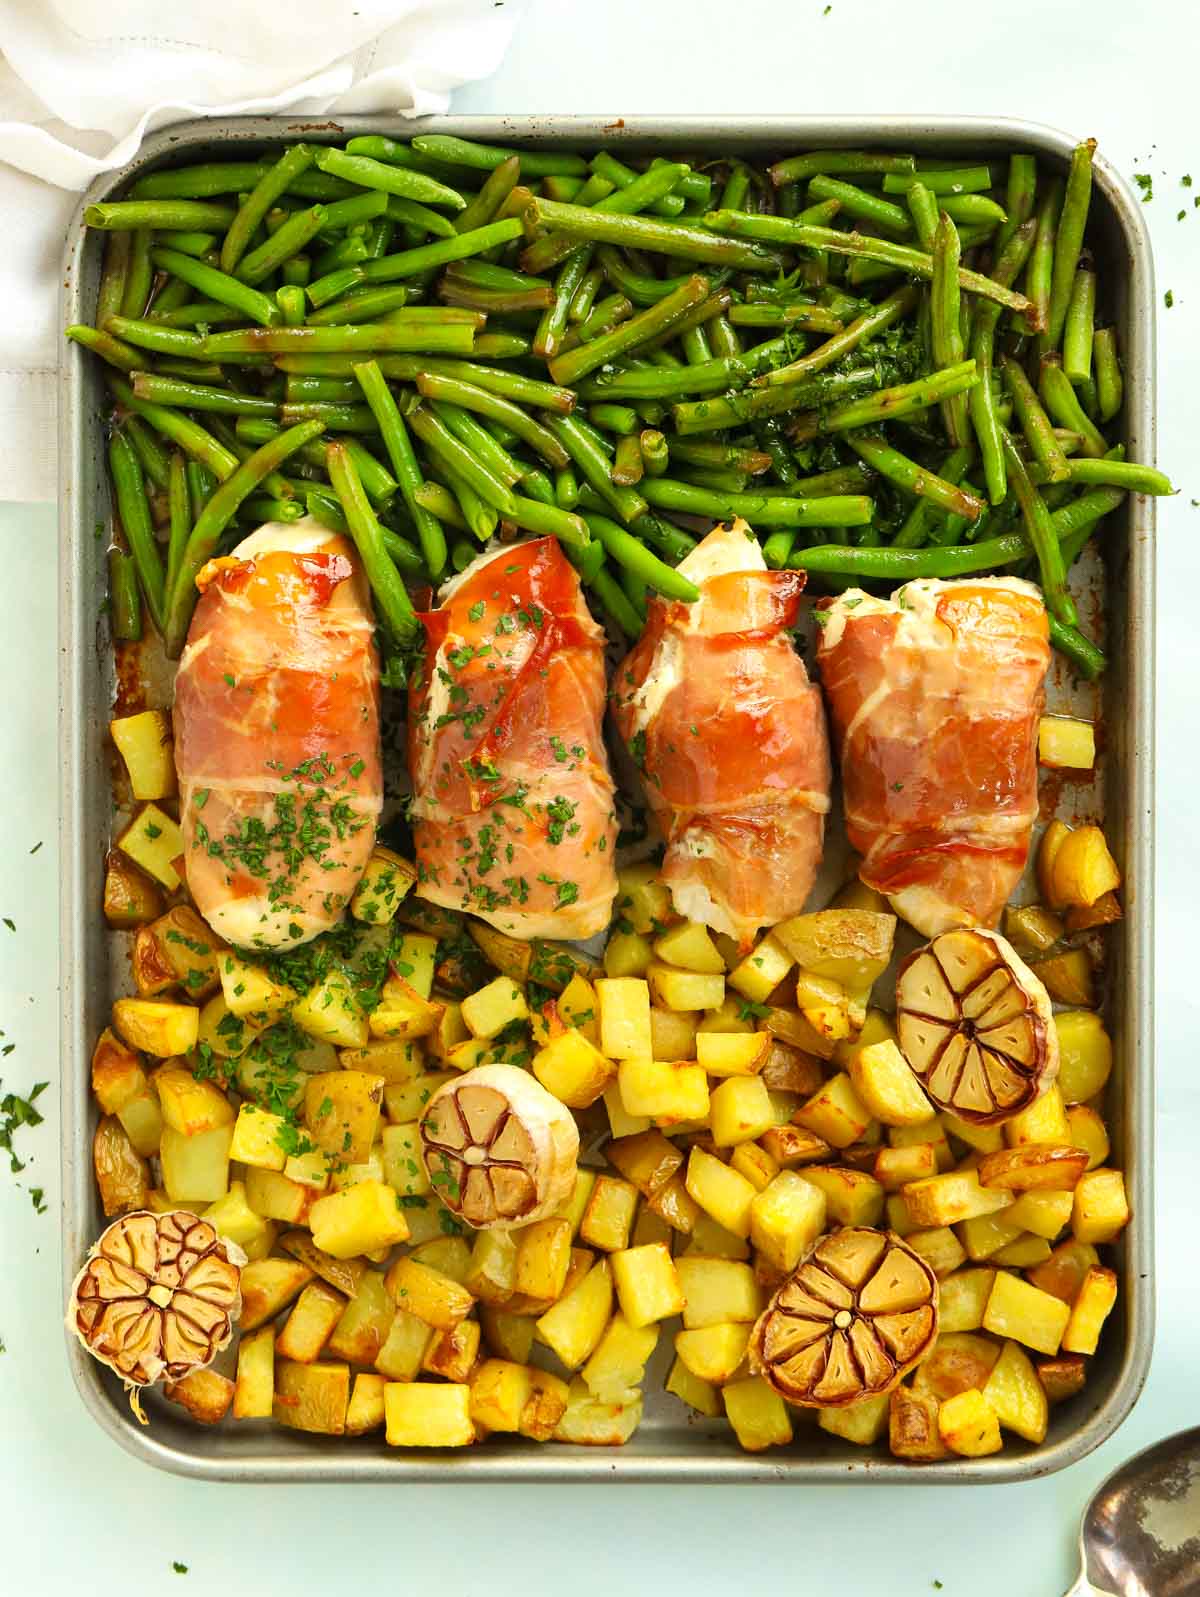 Recipe for bacon wrapped chicken served with potatoes and green beans